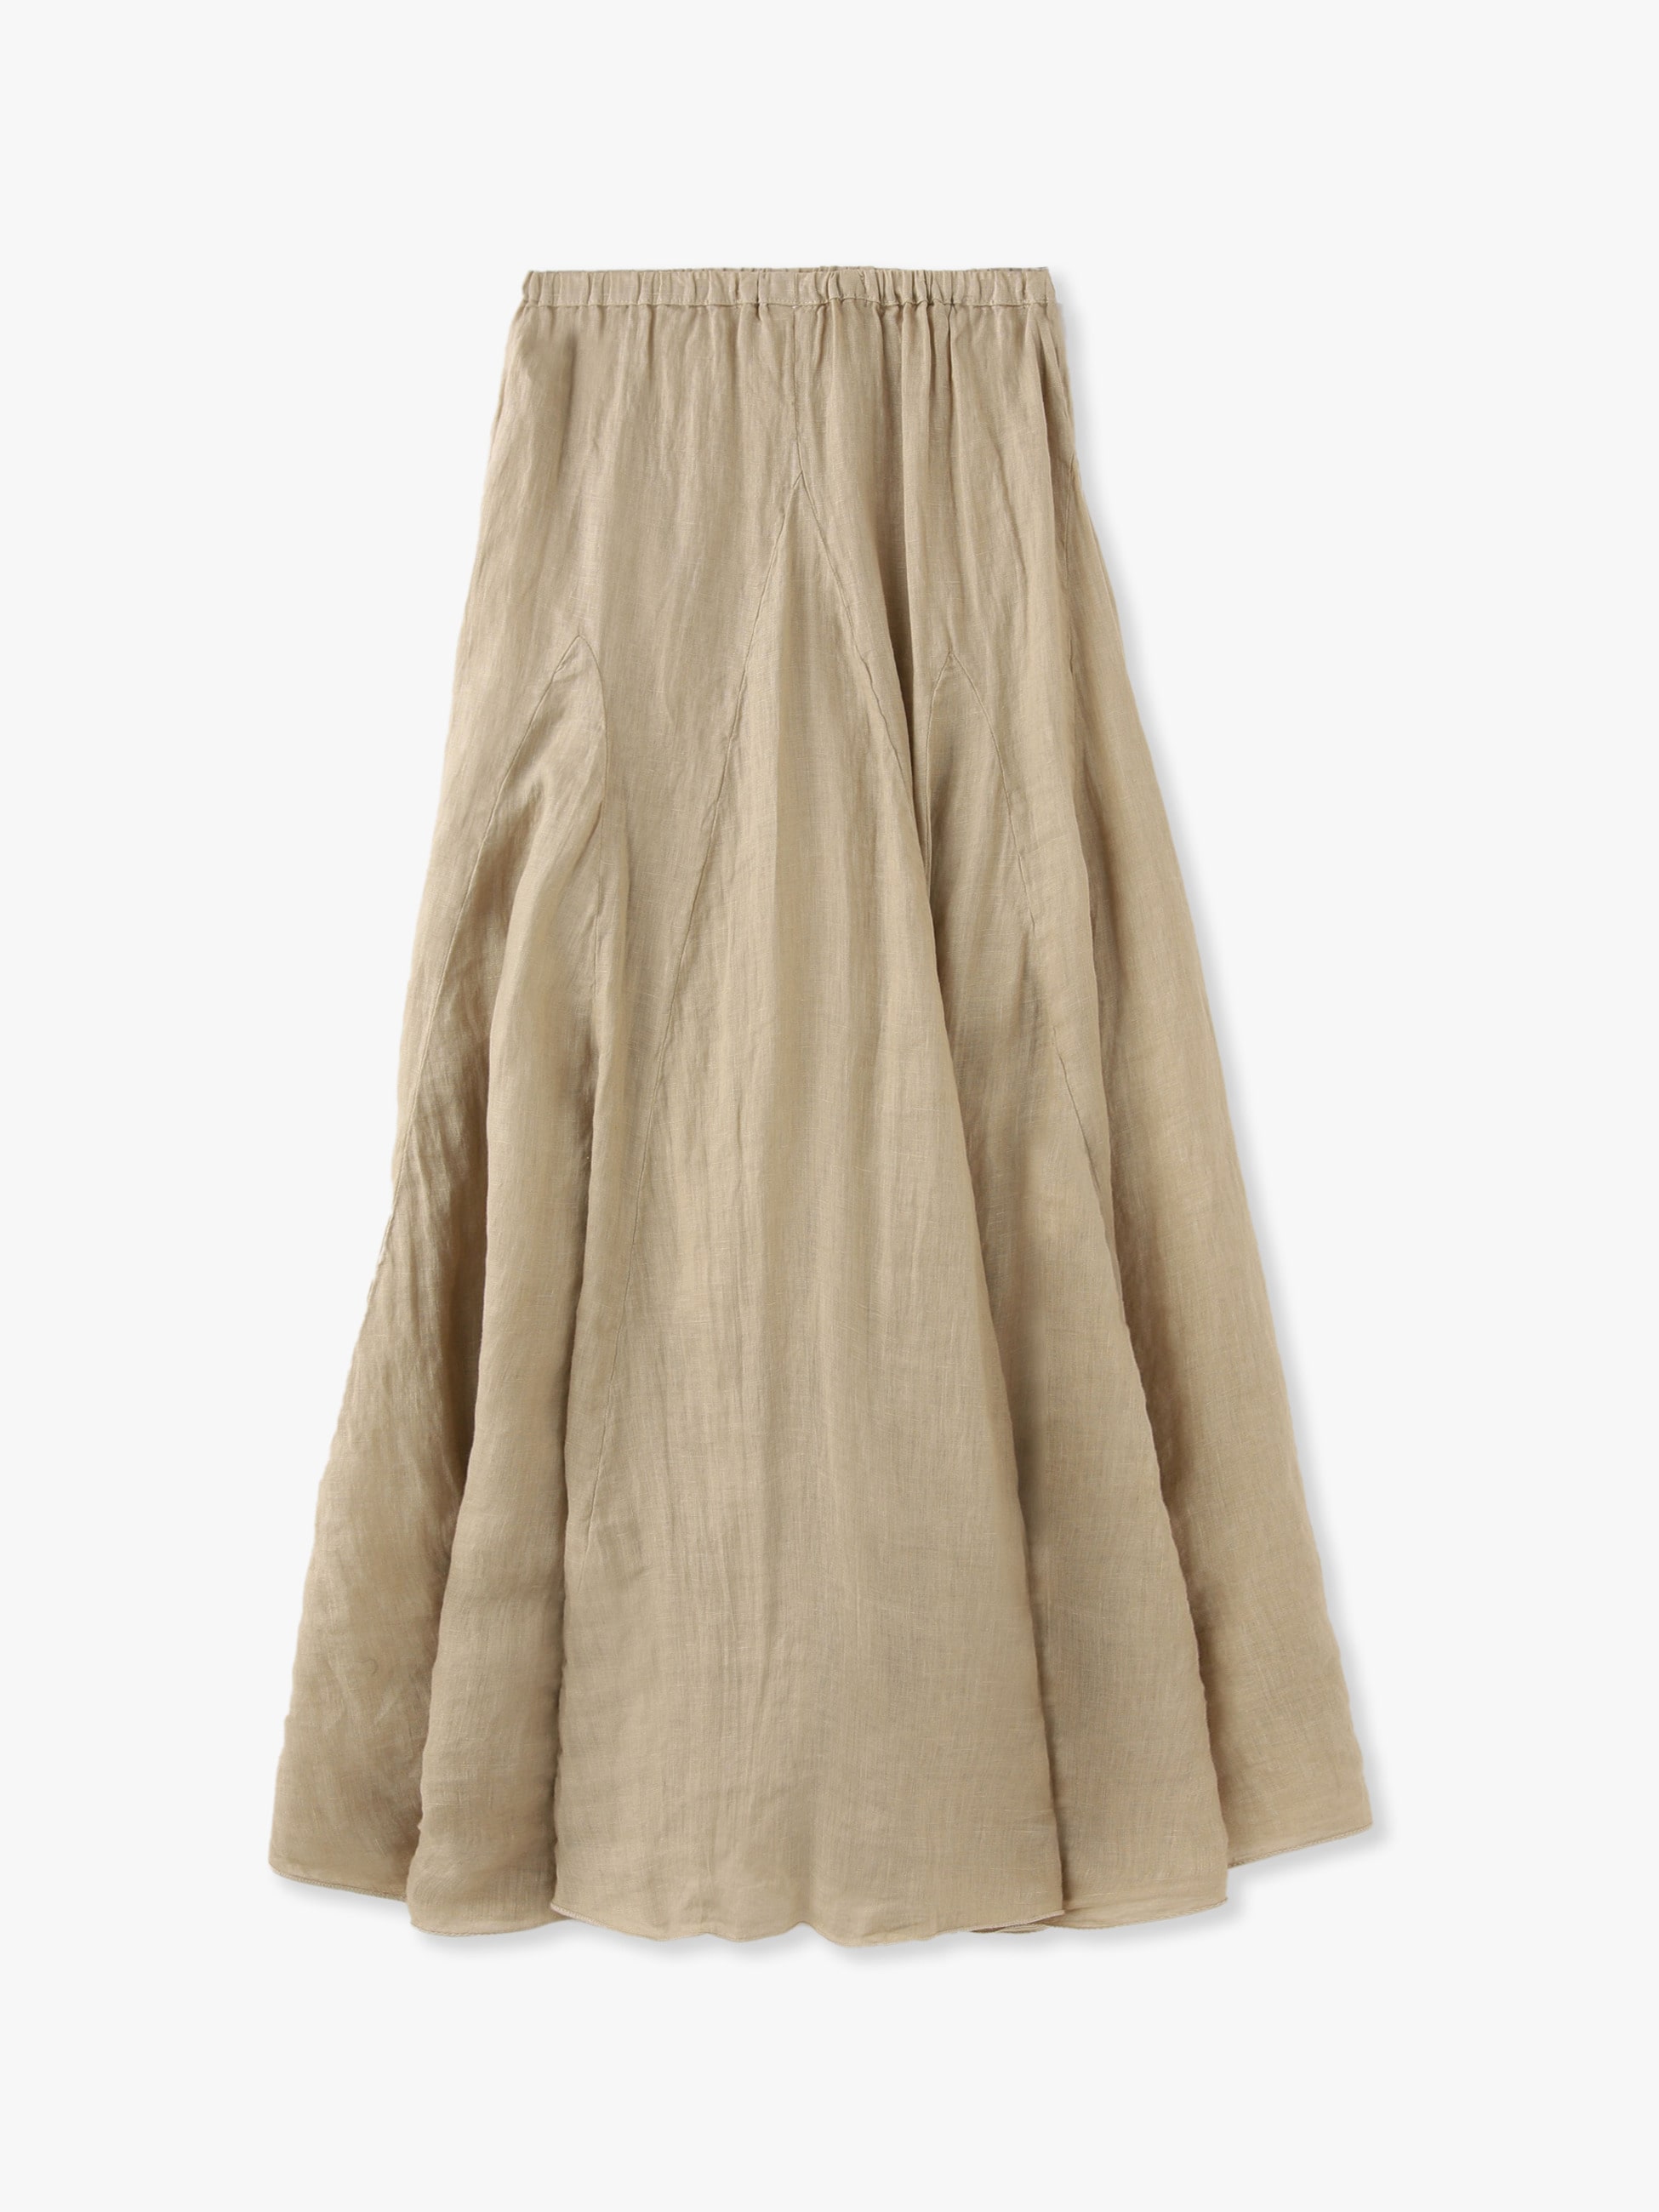 2021 SS ロンハーマン CP SHADES LILY SKIRT - whirledpies.com